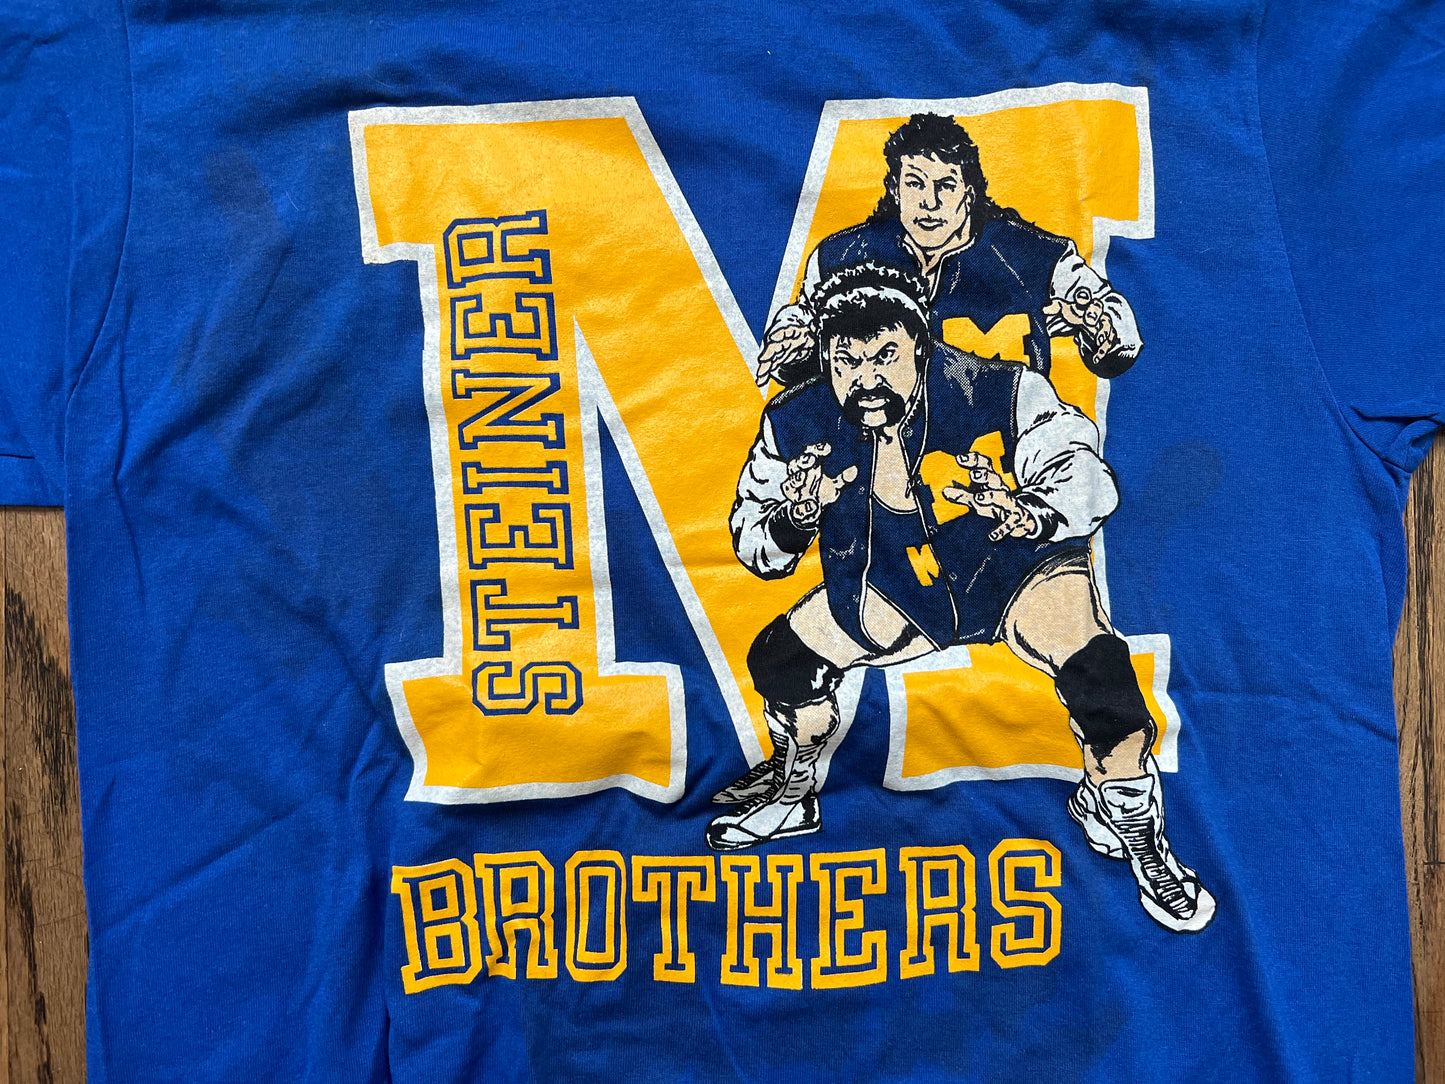 1990 WCW Steiner Brothers shirt